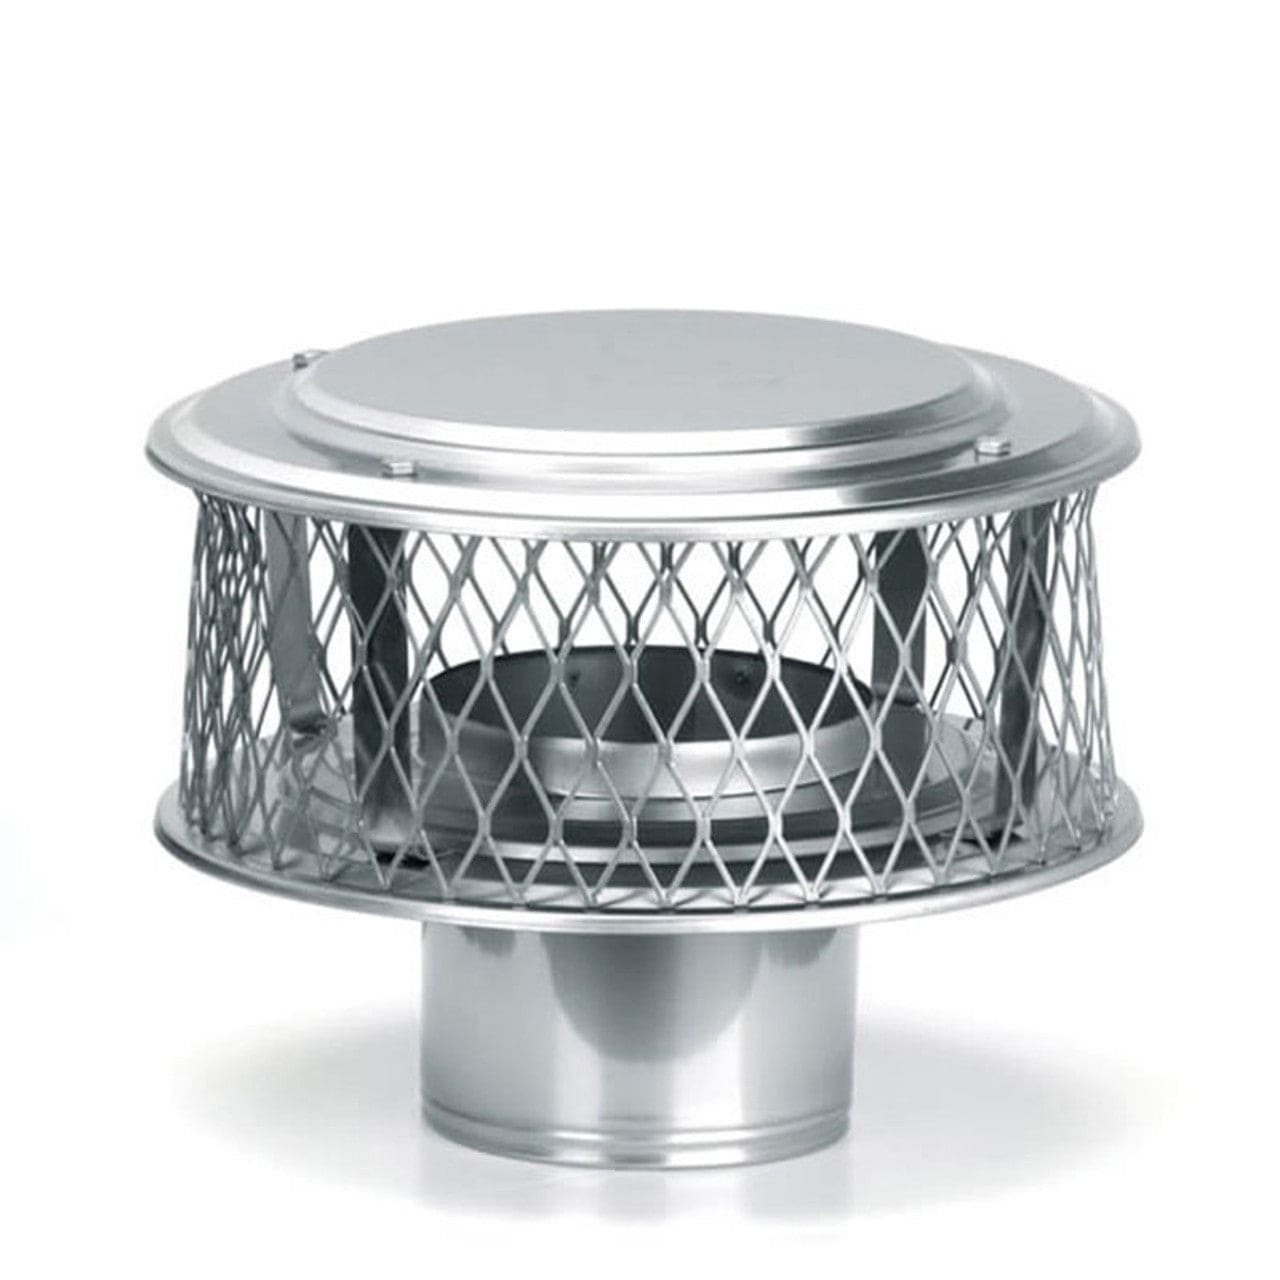 10" HomeSaver 304-Alloy Stainless Steel Guardian Cap with 3/4" Mesh - Chimney Cricket